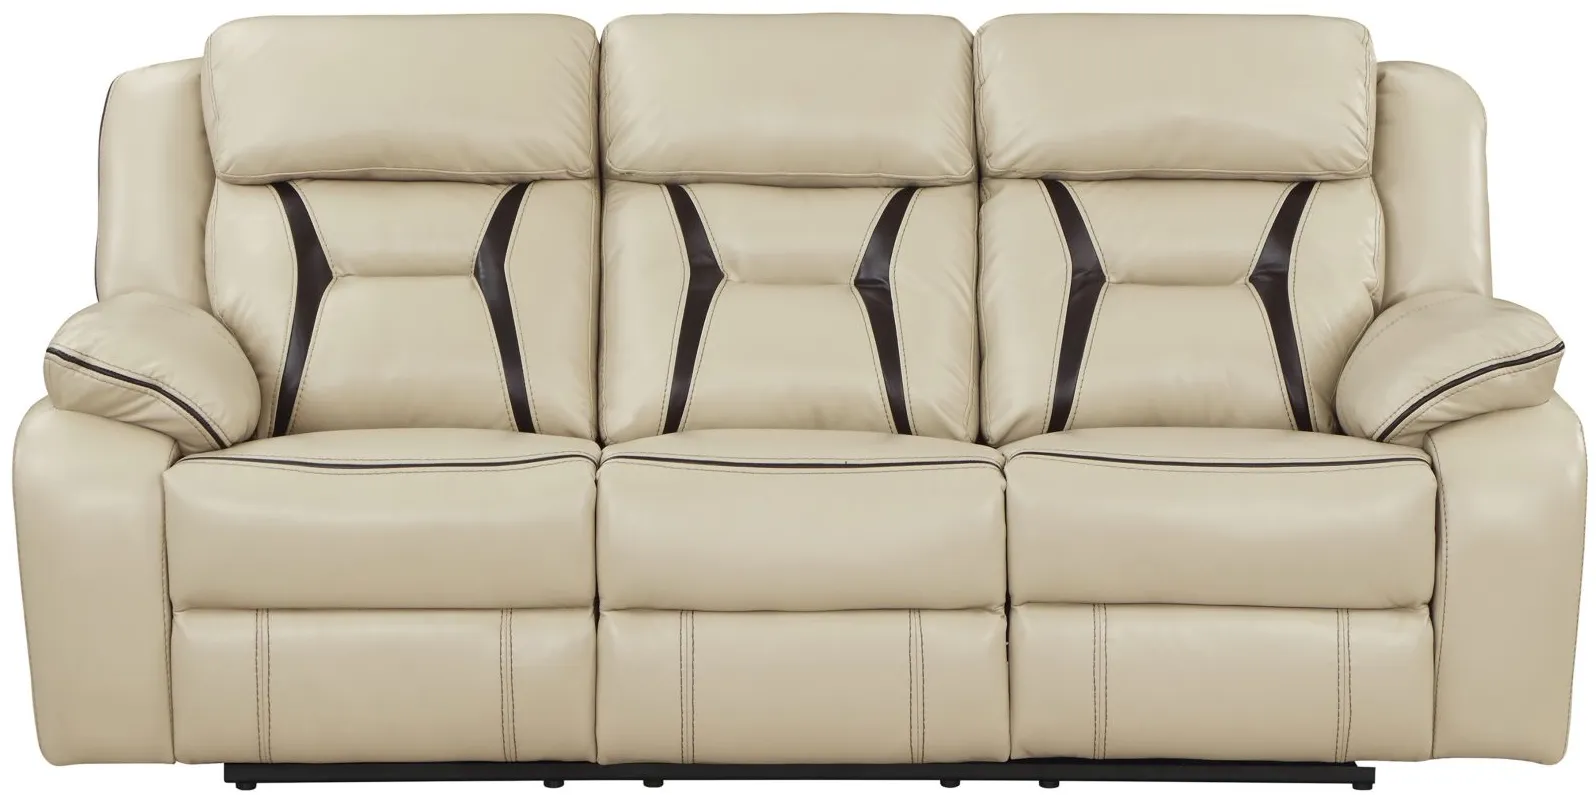 Austin Power Double Reclining Sofa in Beige by Homelegance